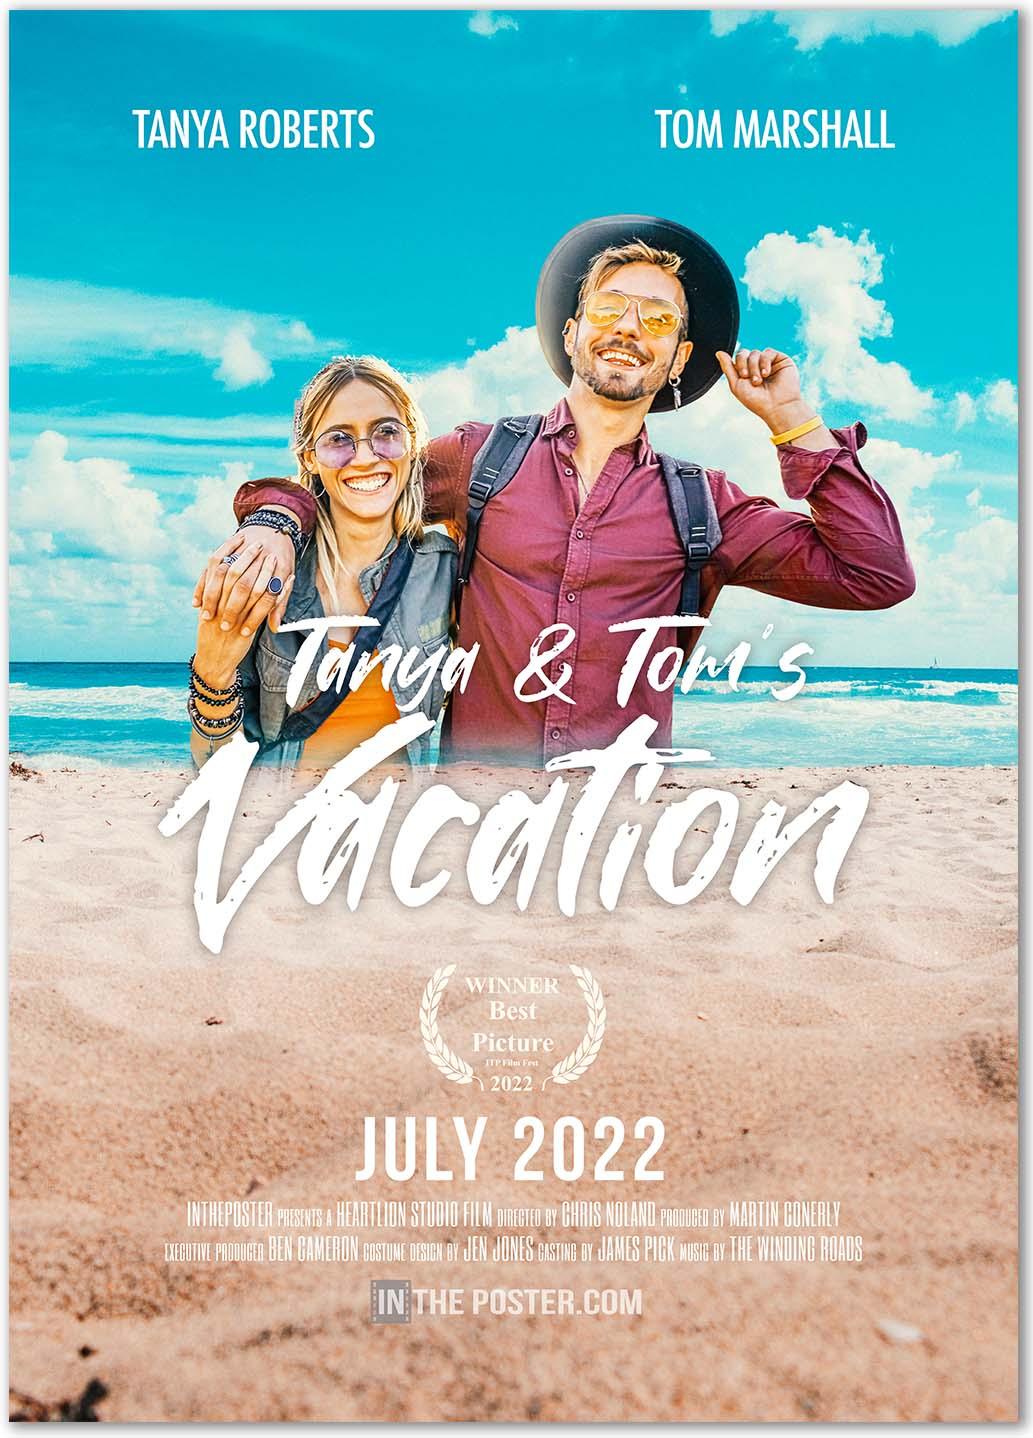 A custom travel movie poster of a young bohemian couple on holiday with bright blue sea and sand